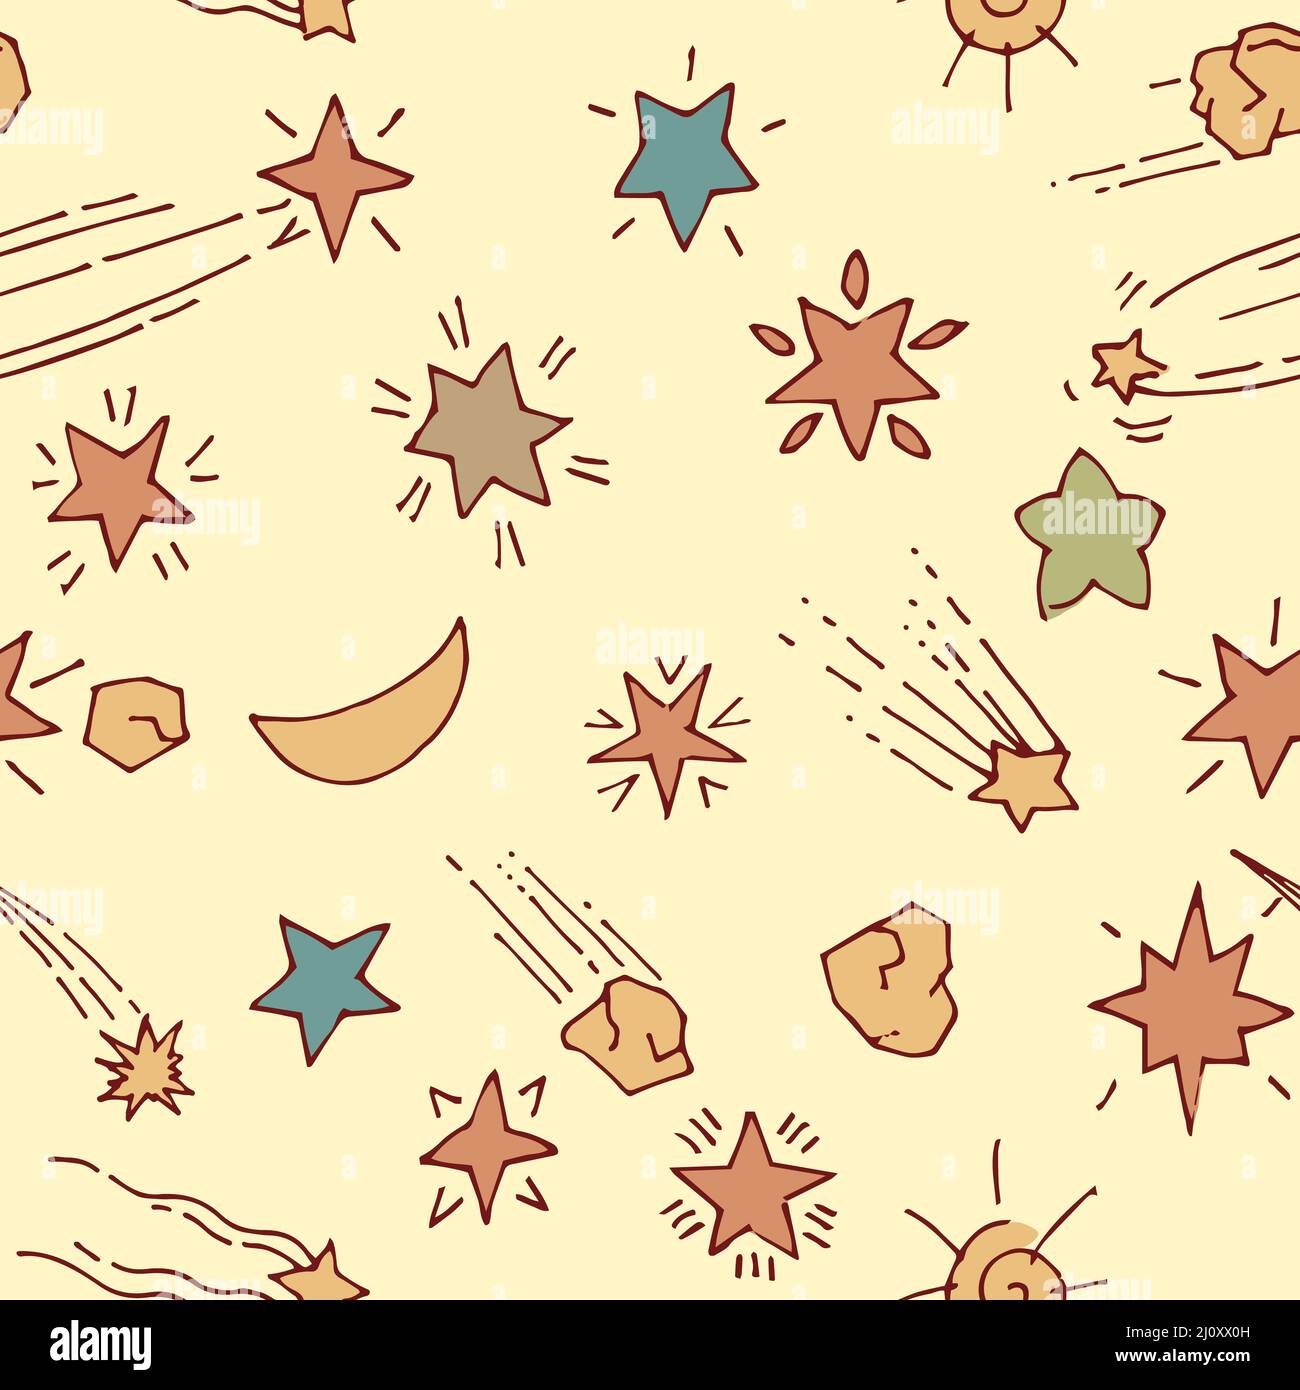 Space background. Seamless pattern. Planets and stars. Beautiful space object. Simple doodle drawing in childish style. Outline sketch. Hand drawing Stock Vector